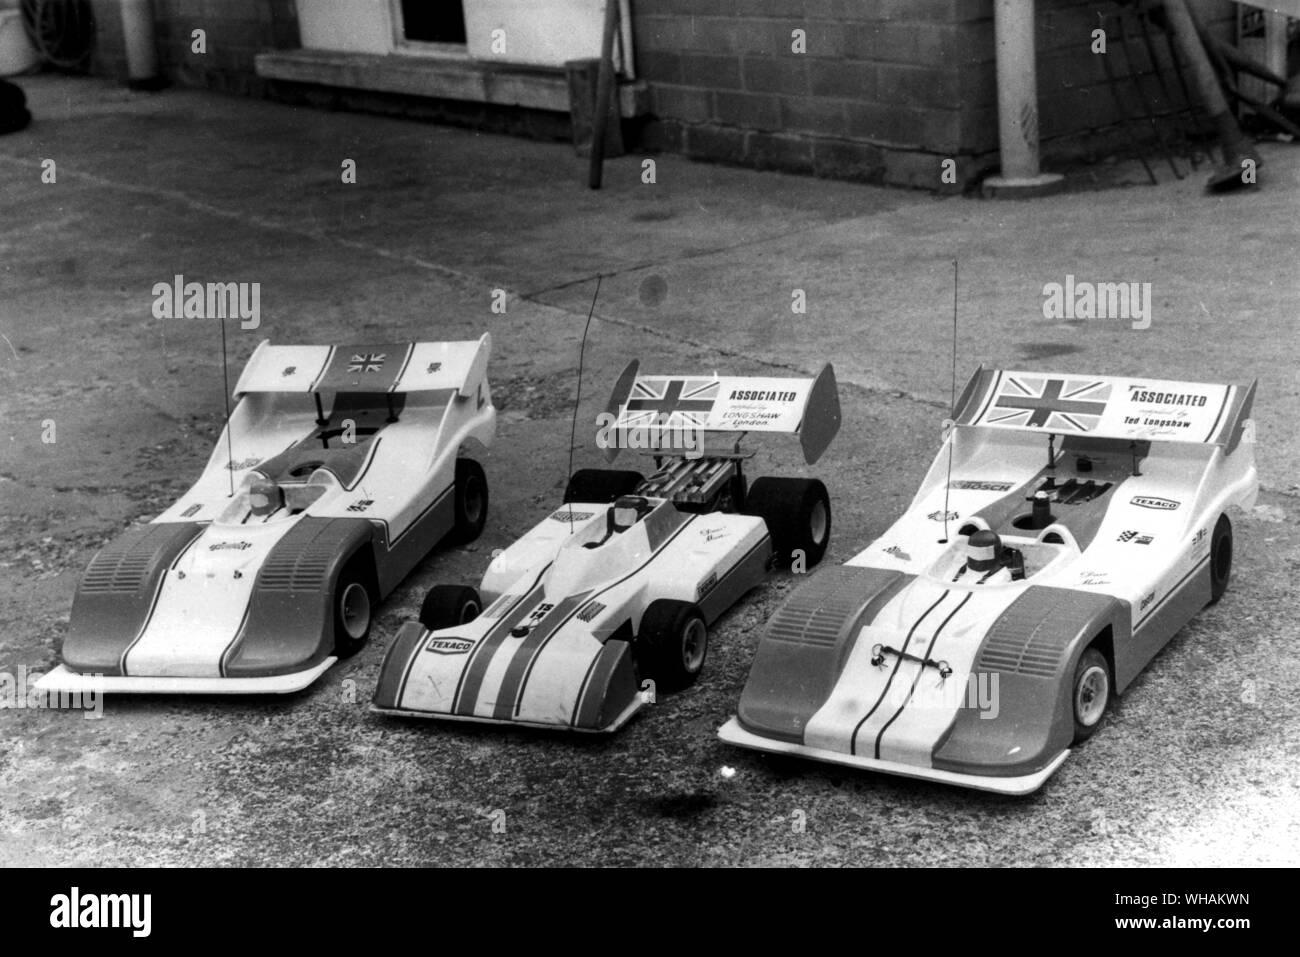 Three Associated kit cars prepared by Tom and Dave Martin for the final open meetings of the 1975 season. All the cars are powered by McCoy Veco 19 engines with slide carburettors of Toms own design. The formula car is fitted with a Surtees TS 14 body and the 2 Sports GT cars with Porsche 910/30KL bodies. Dave's RC 100 car on the right won all classes at the autumn 'Mintex' meeting at Bradford on its first competetive outing in Britain Stock Photo